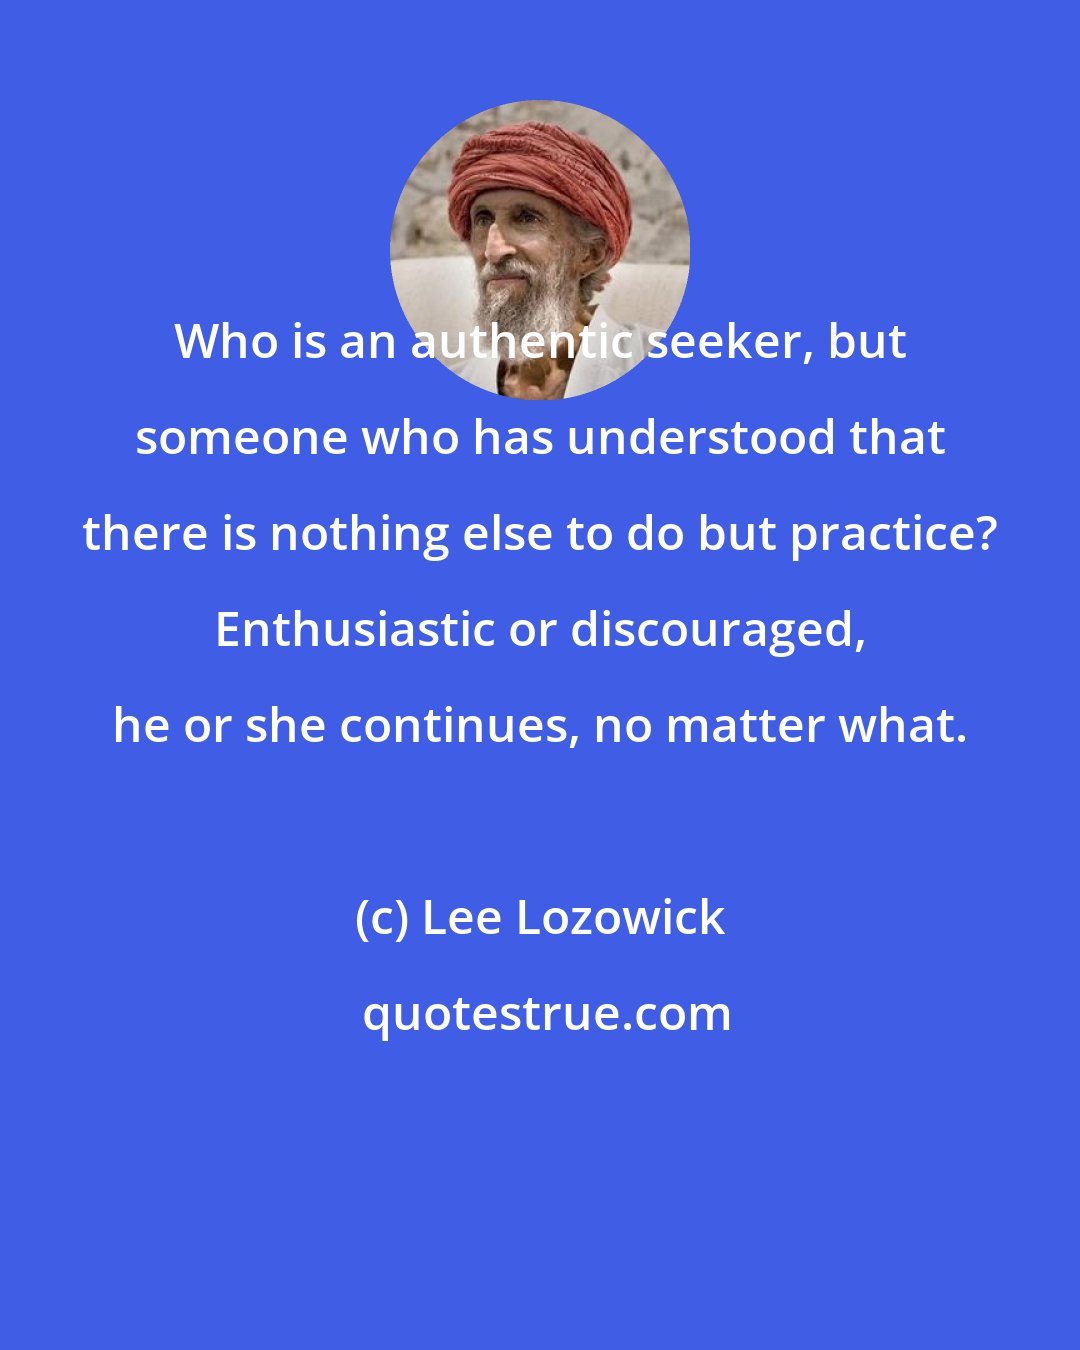 Lee Lozowick: Who is an authentic seeker, but someone who has understood that there is nothing else to do but practice? Enthusiastic or discouraged, he or she continues, no matter what.